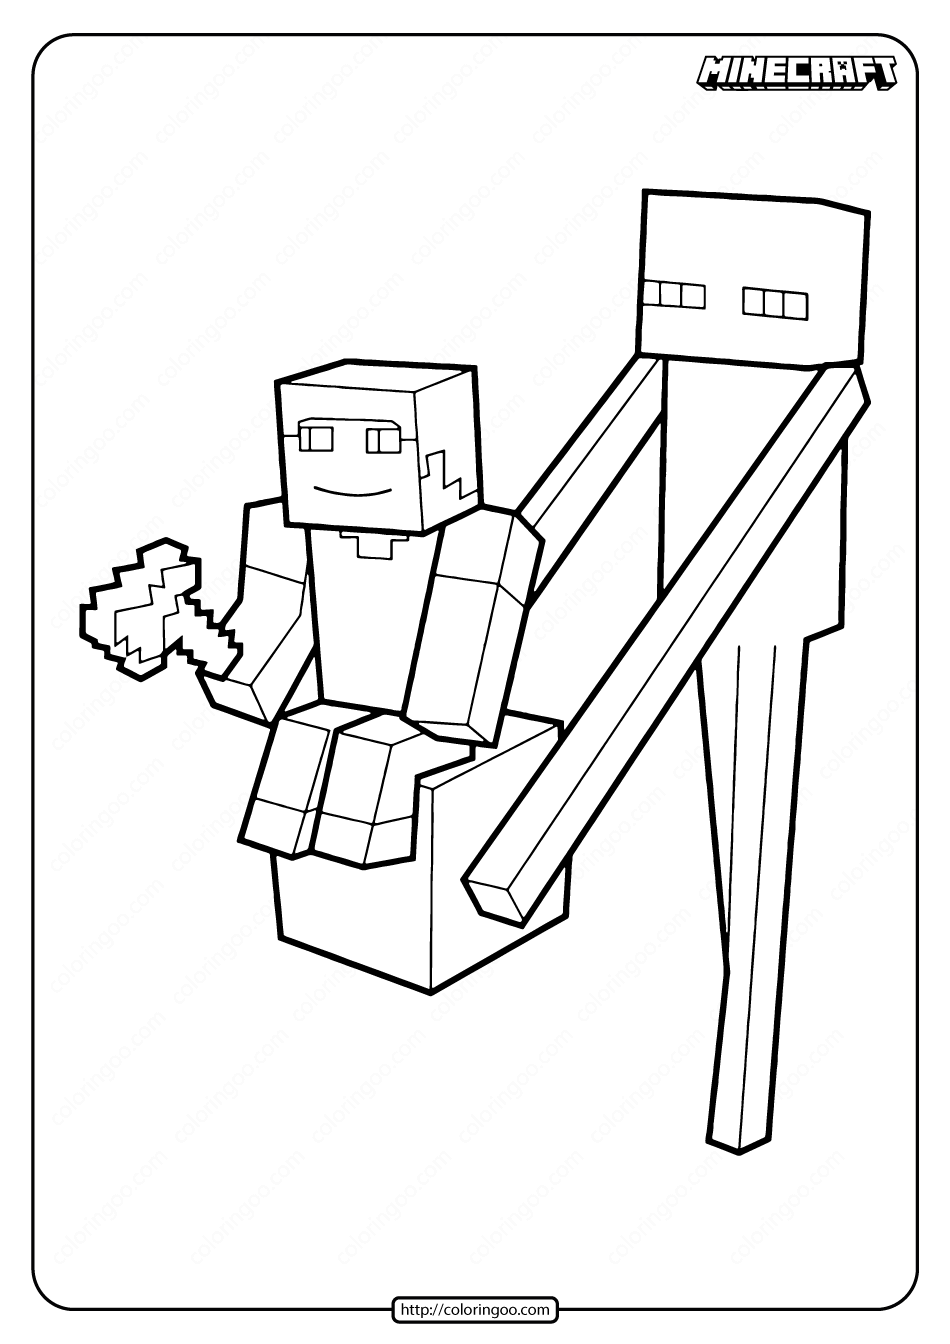 minecraft enderman with steve coloring pages